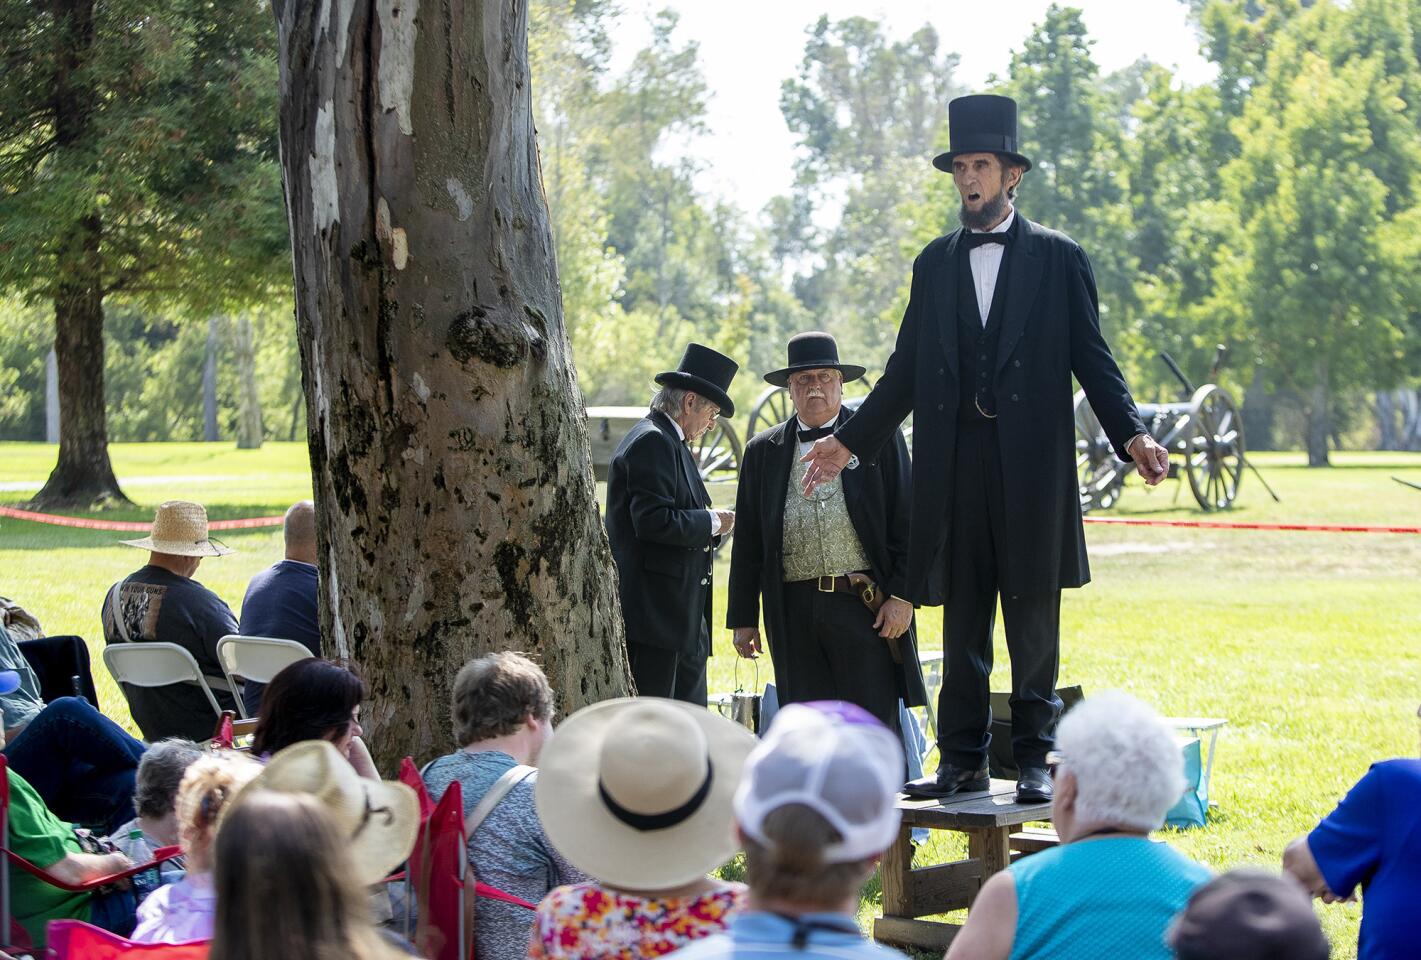 Photo Gallery: 24th annual Civil War Days Living History Event in Huntington Beach